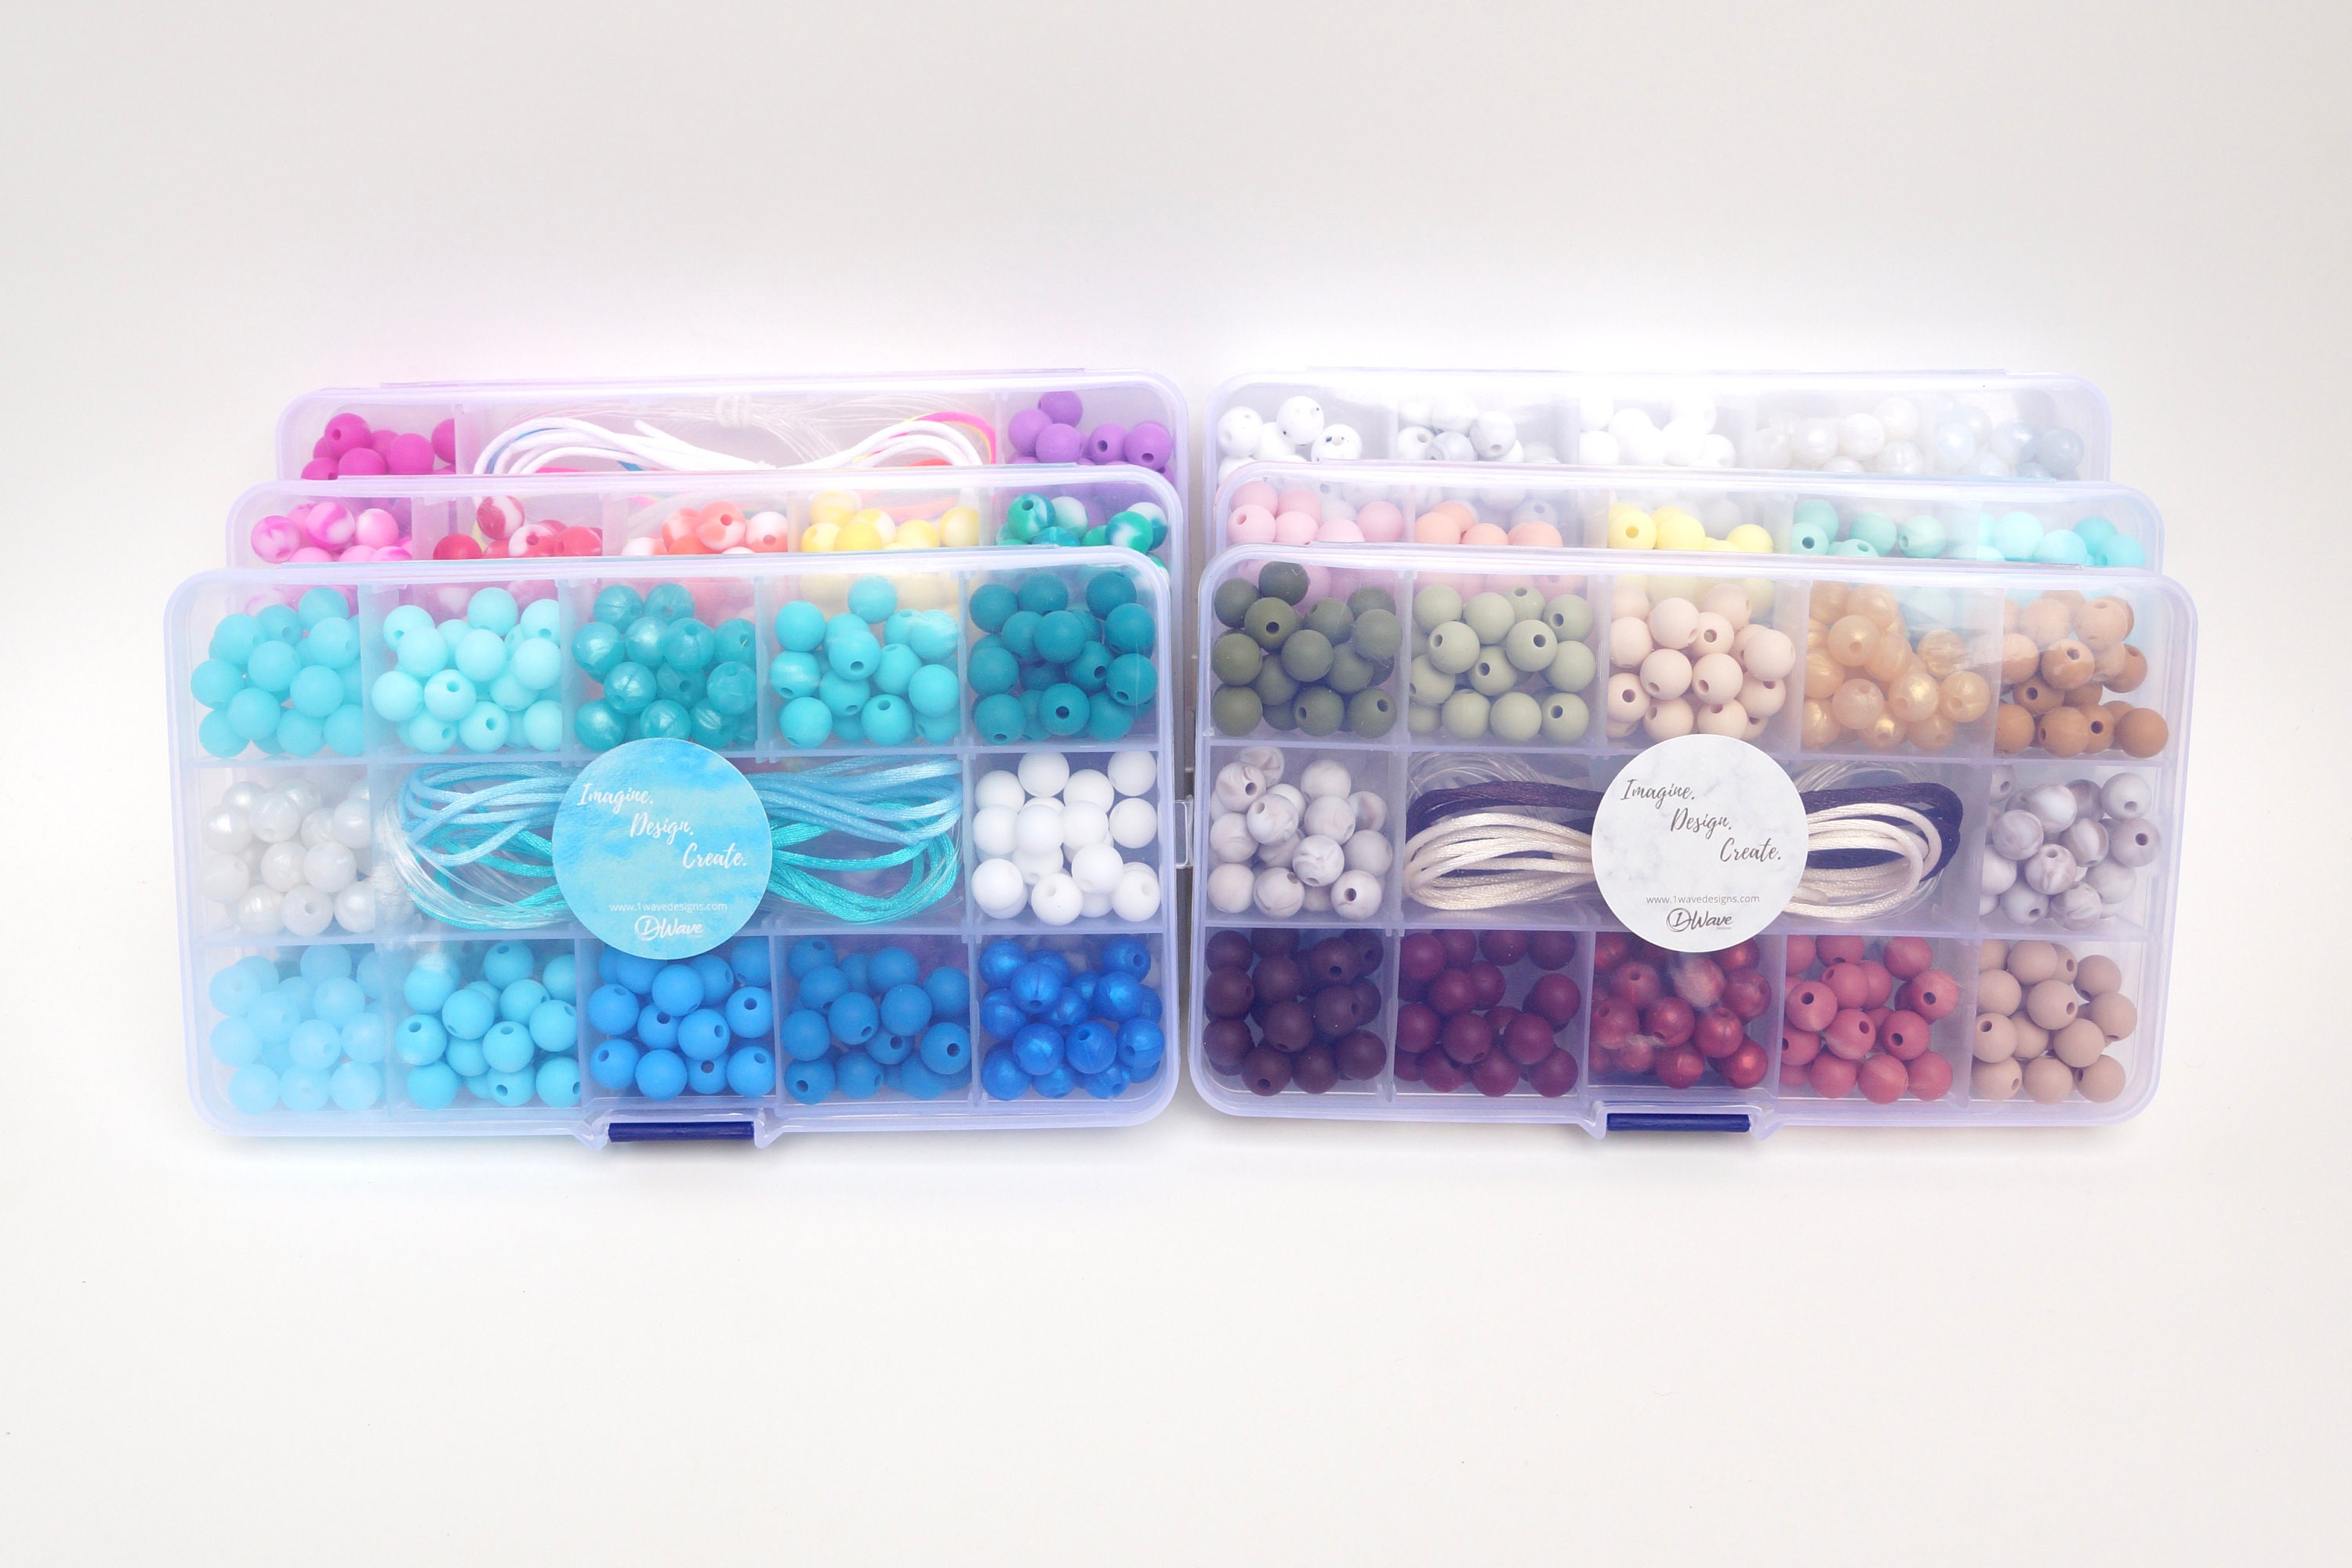 DIY Silicone Bead Kit ocean Splash Make Your Own Jewellery 9 Mm Beads Craft  Kids & Adults Supports Mental Health 